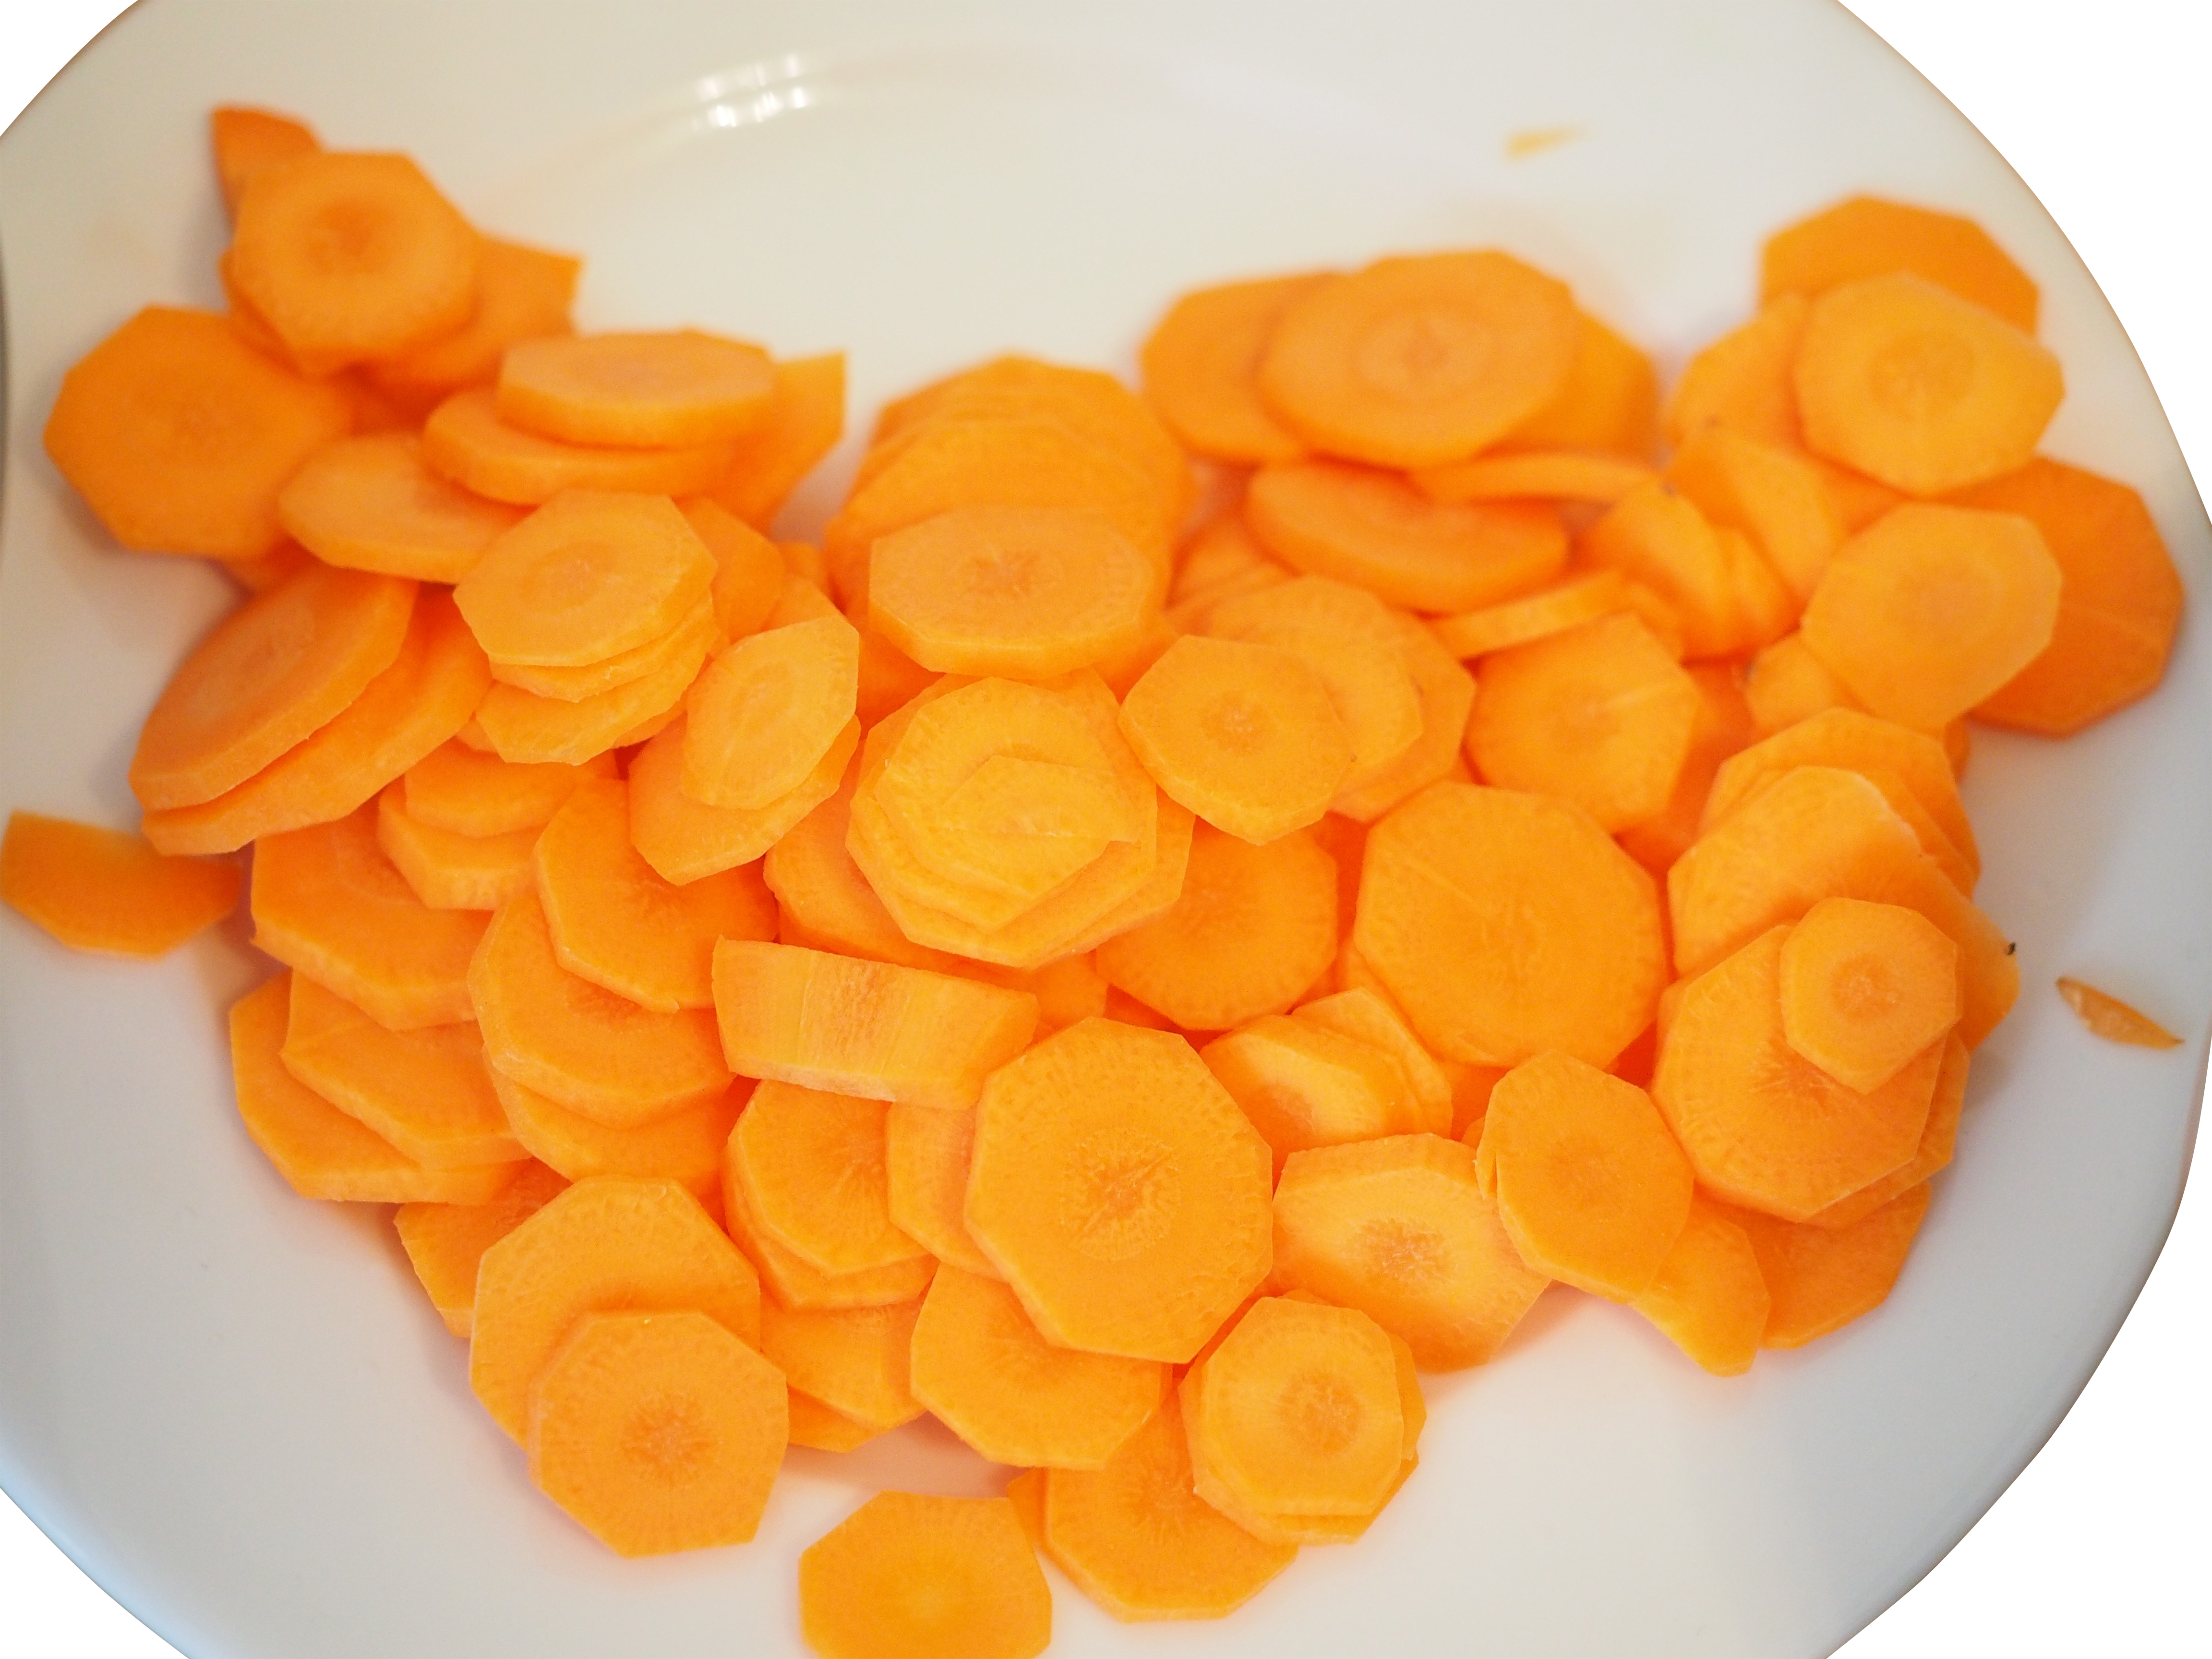 Orange Chopped Carrots in a plate PNG Image